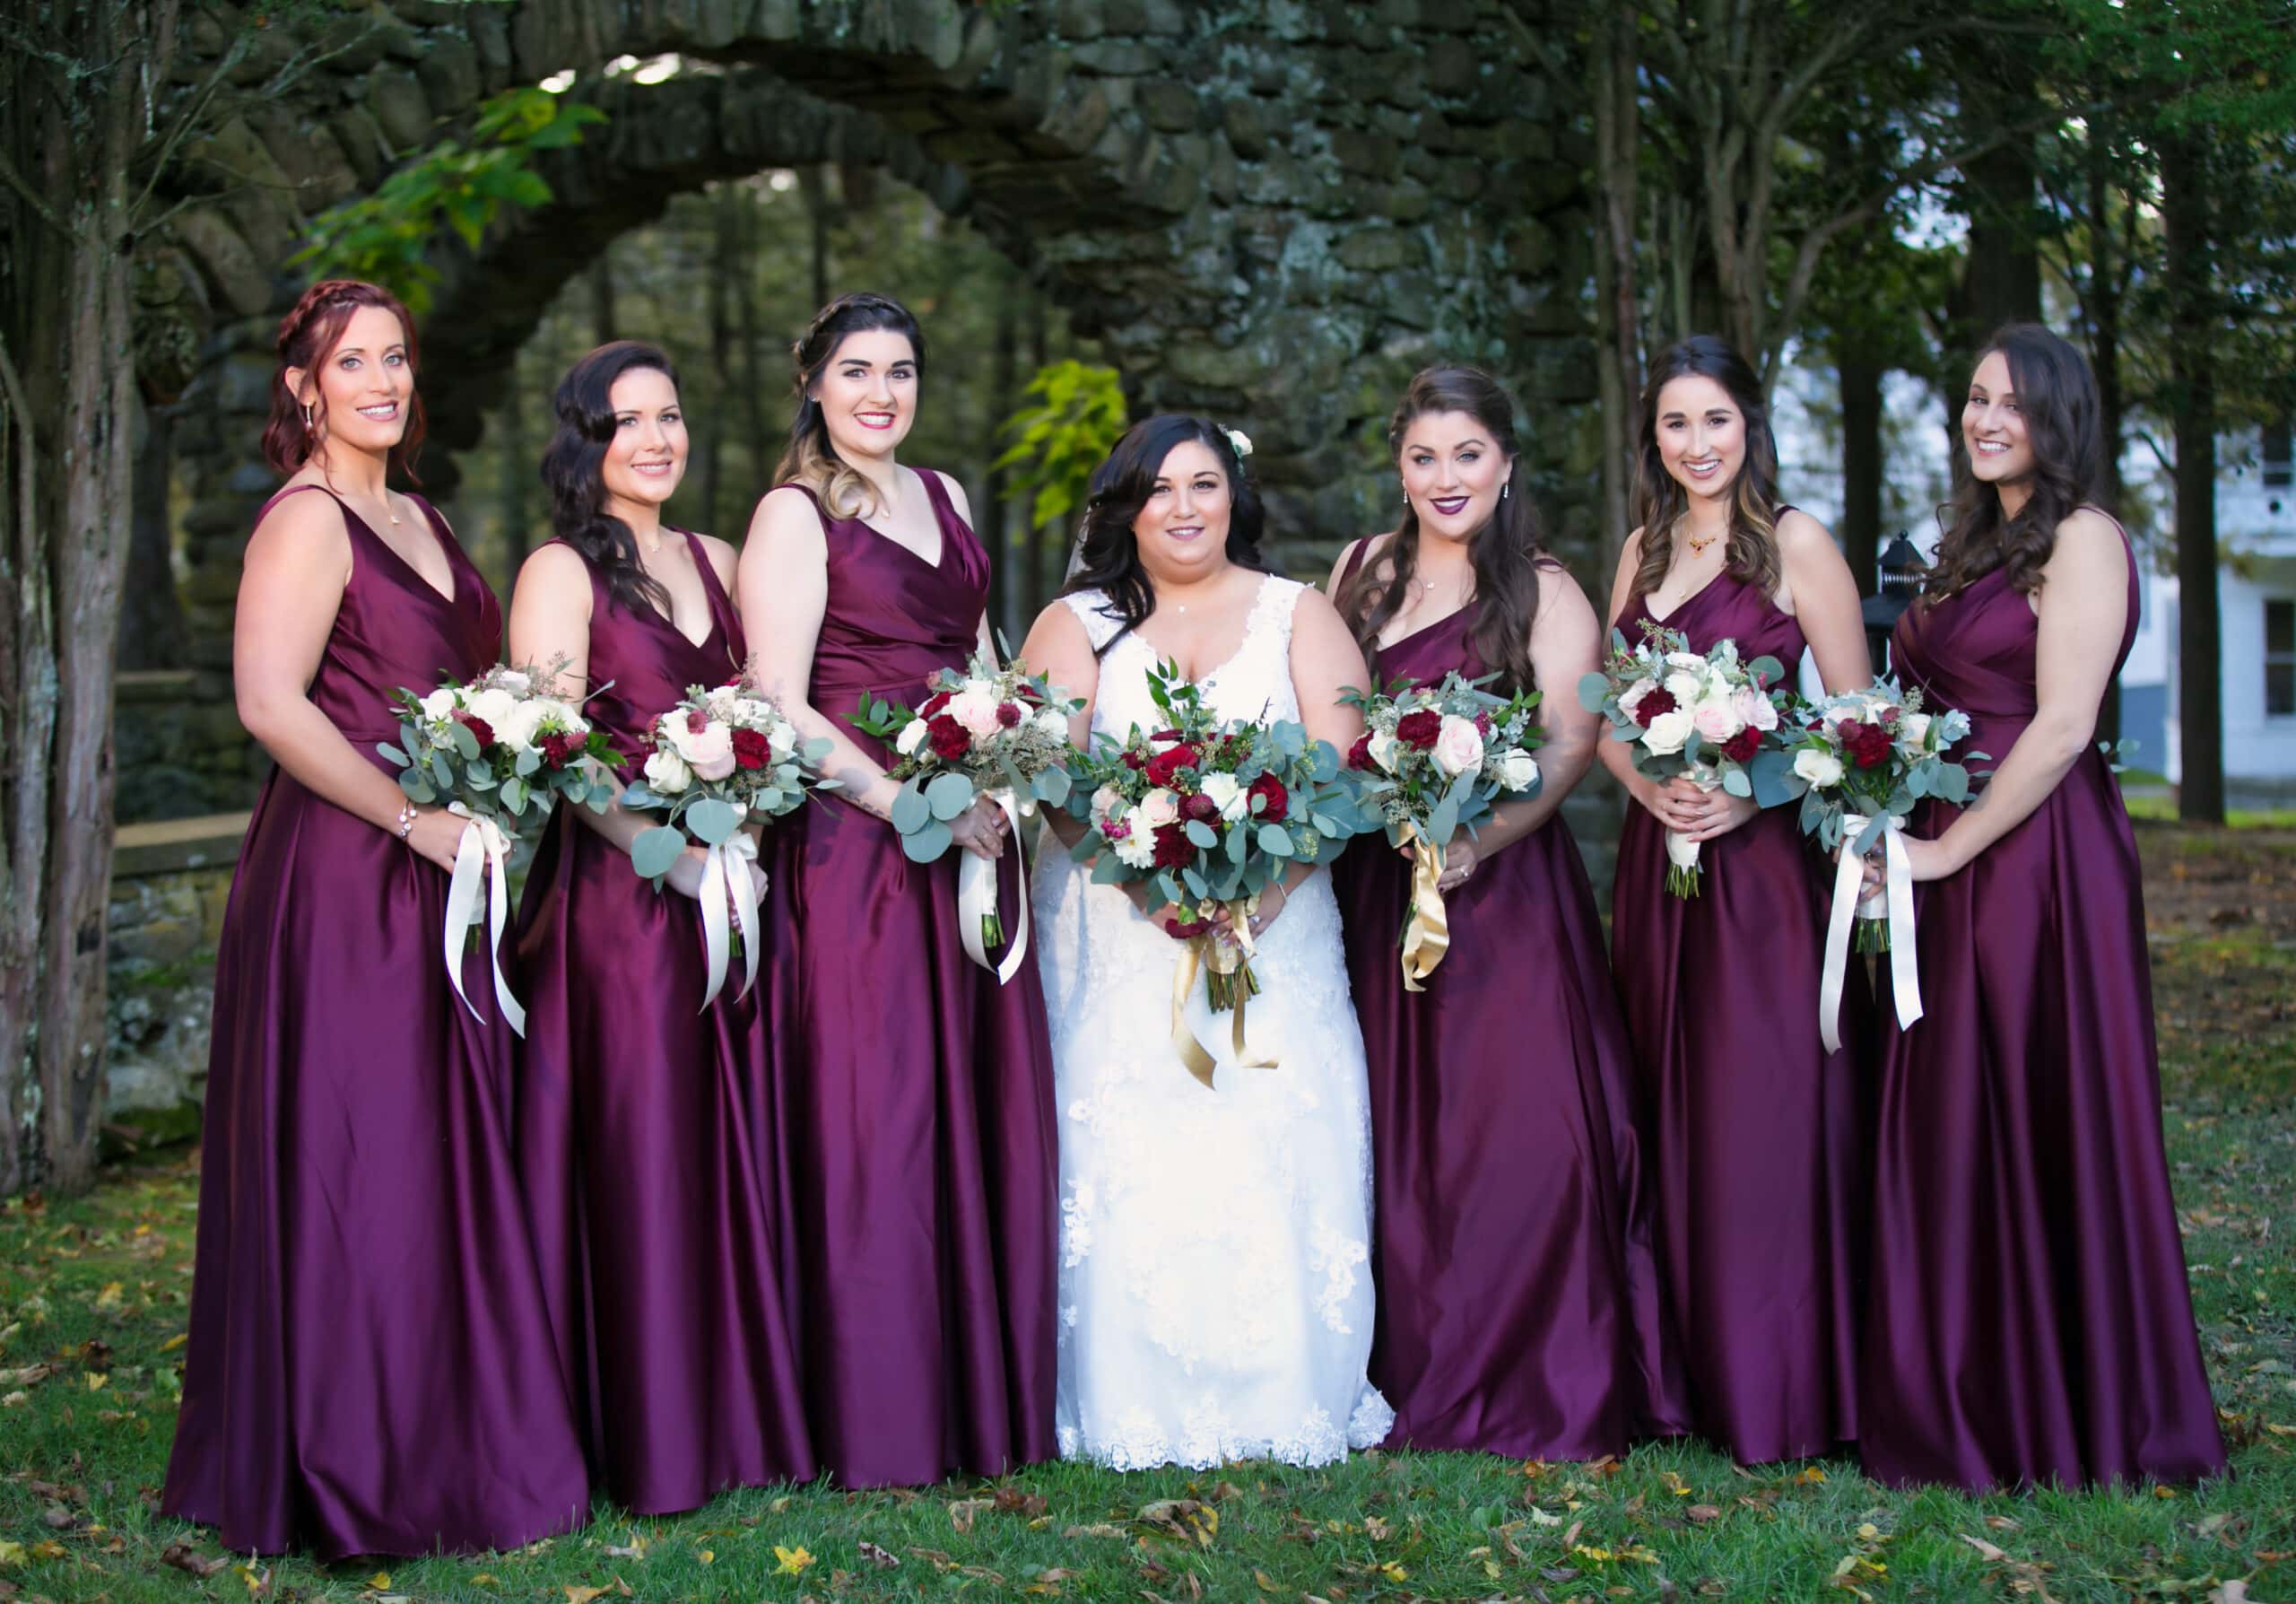 Bride-and-bridesmaids-in-wine-colored-dress-at-Brotherhood-wineryWedding-party